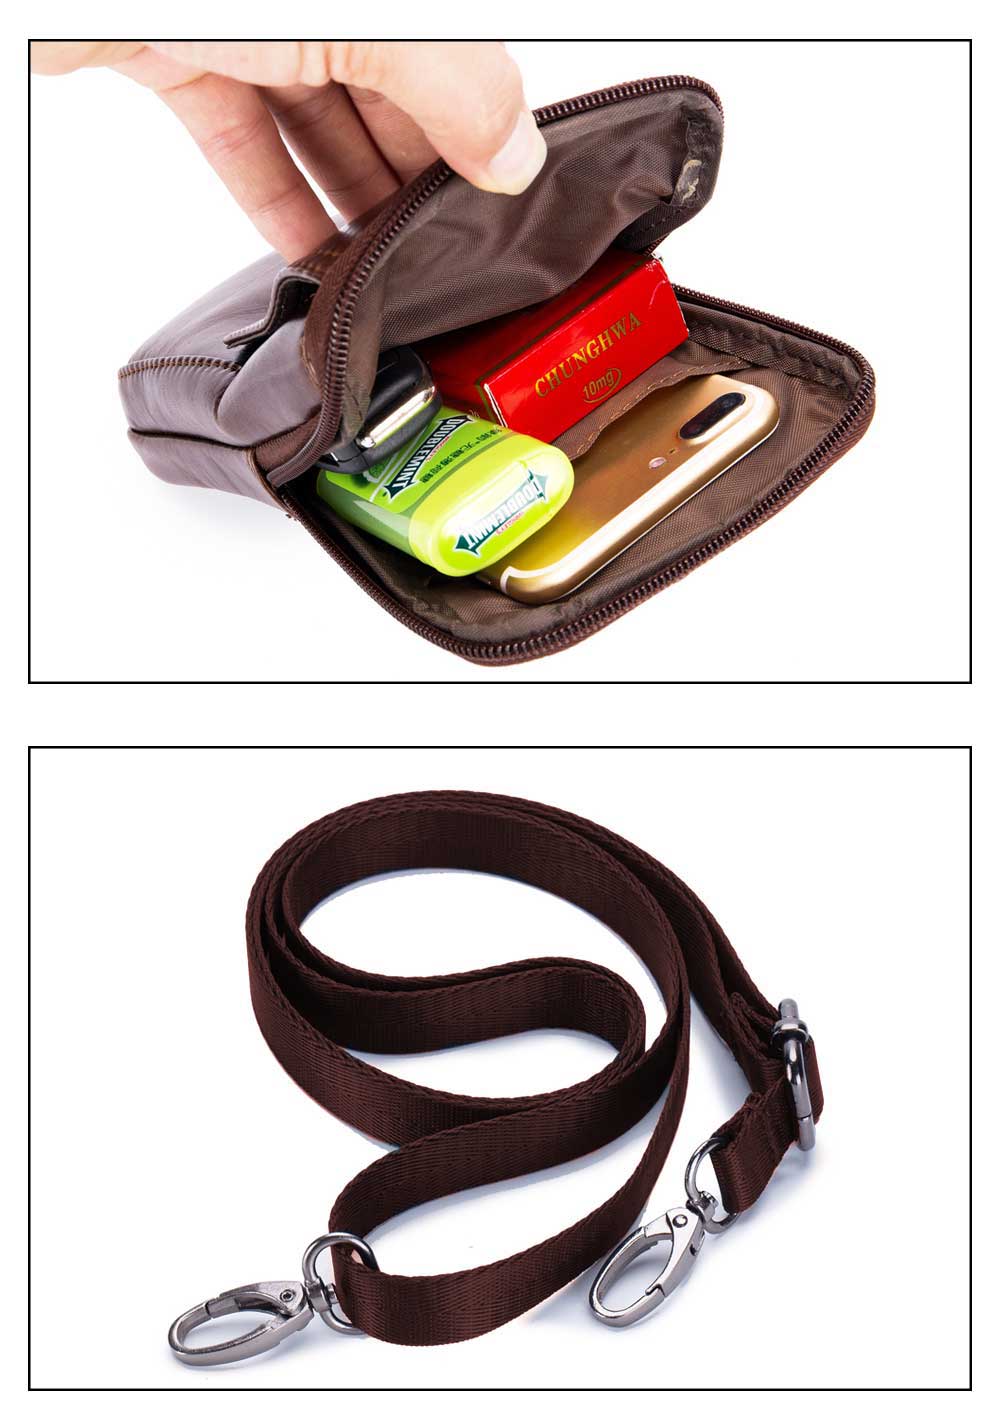 Genuine Leather Men's Waist Packs Phone Pouch Bags- Coffee